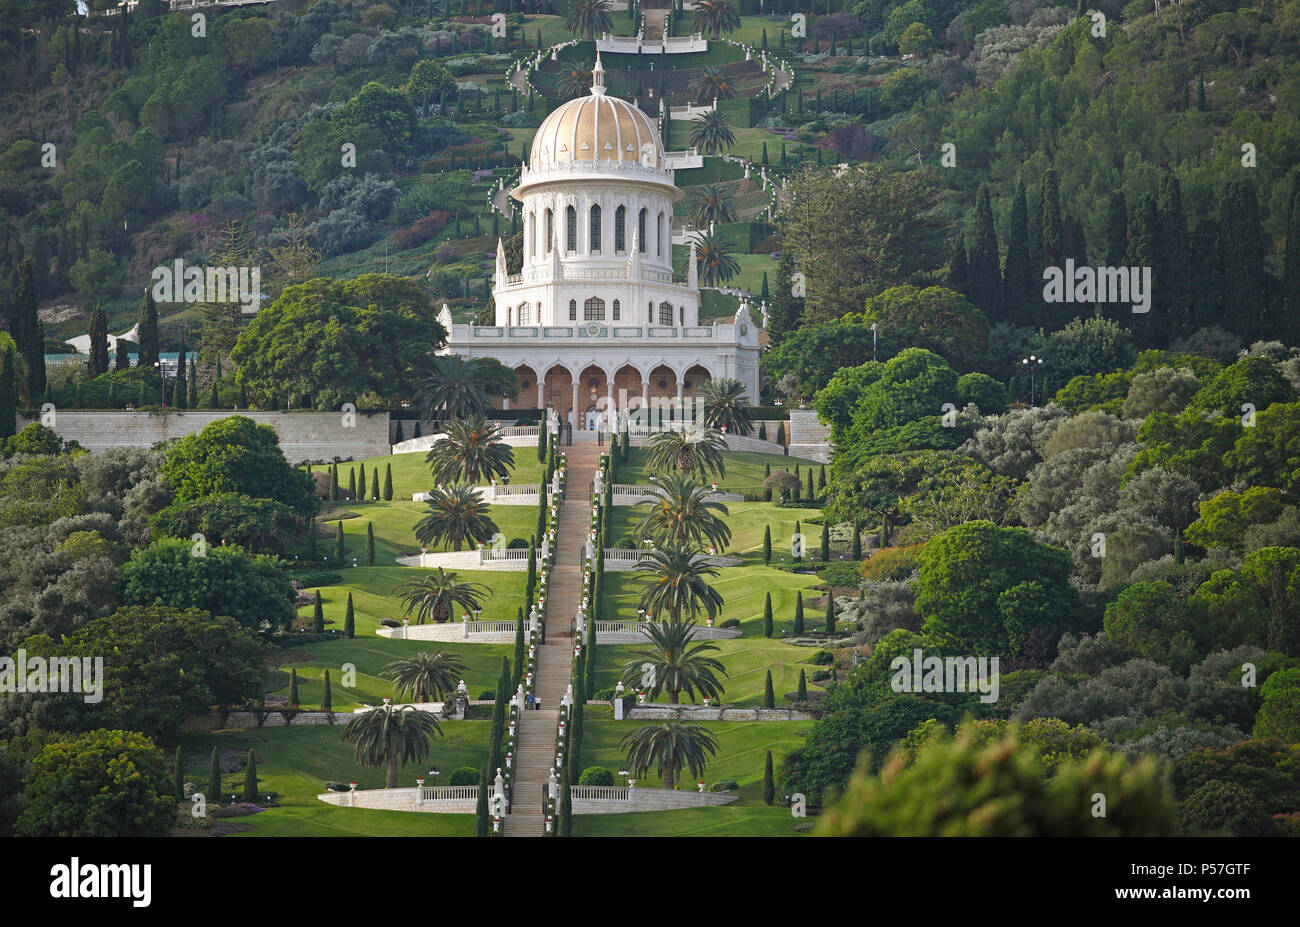 The Gardens of the Bahai on Mount Carmel and Shrine of Bab Tomb with Dome, Haifa, Israel Stock Photo